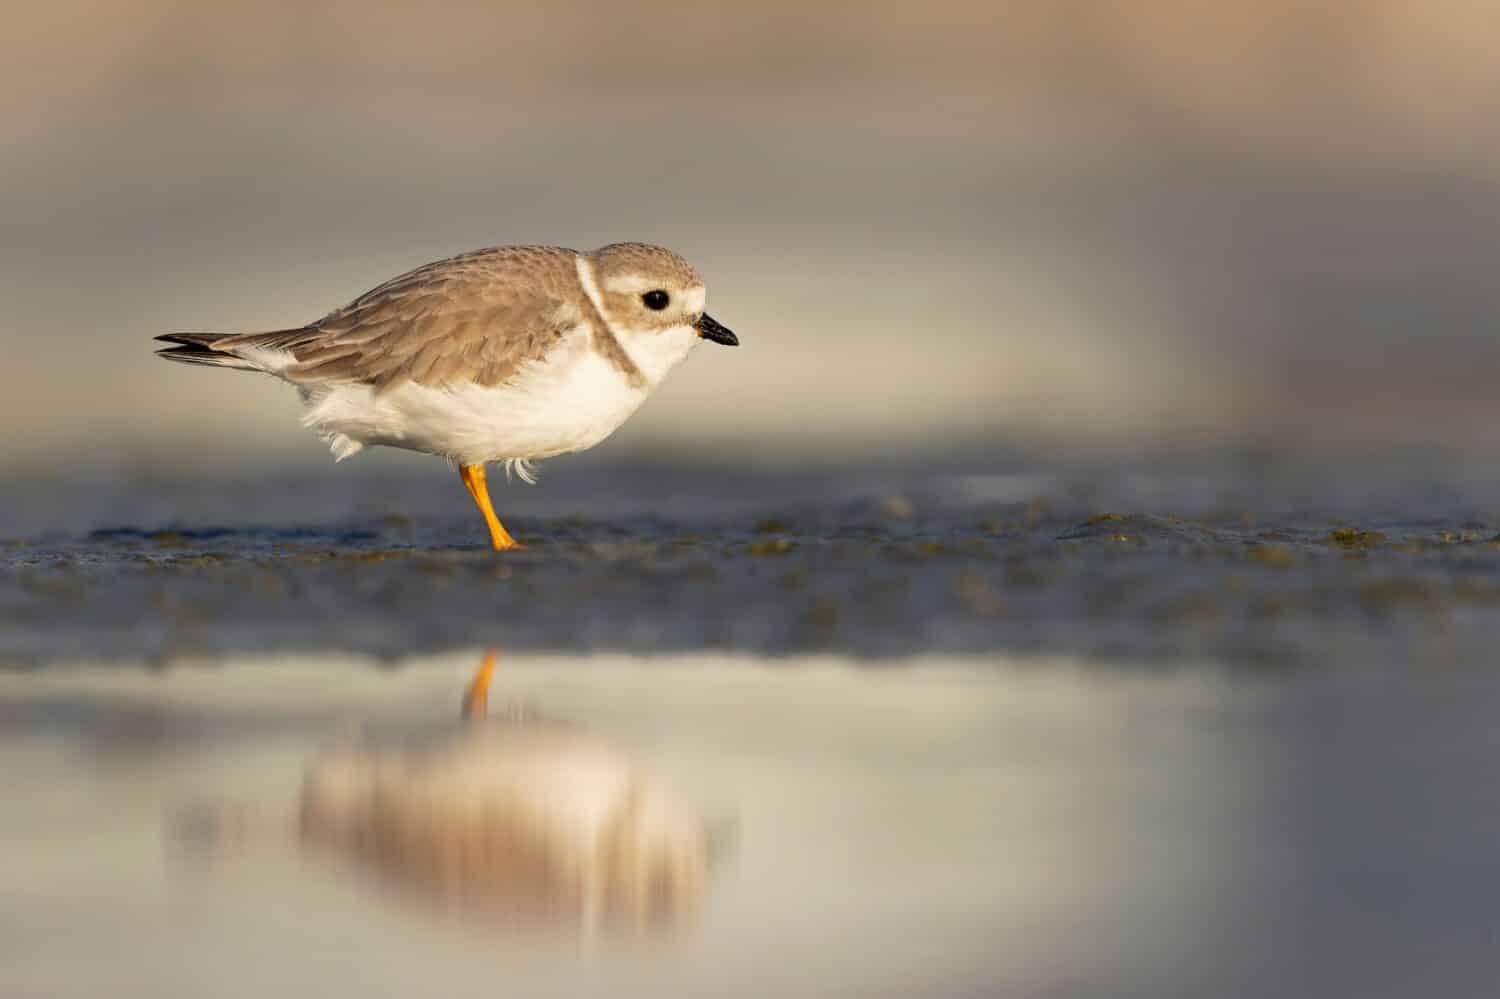 A piping plover (Charadrius melodus) foraging on a beach at sunset.	